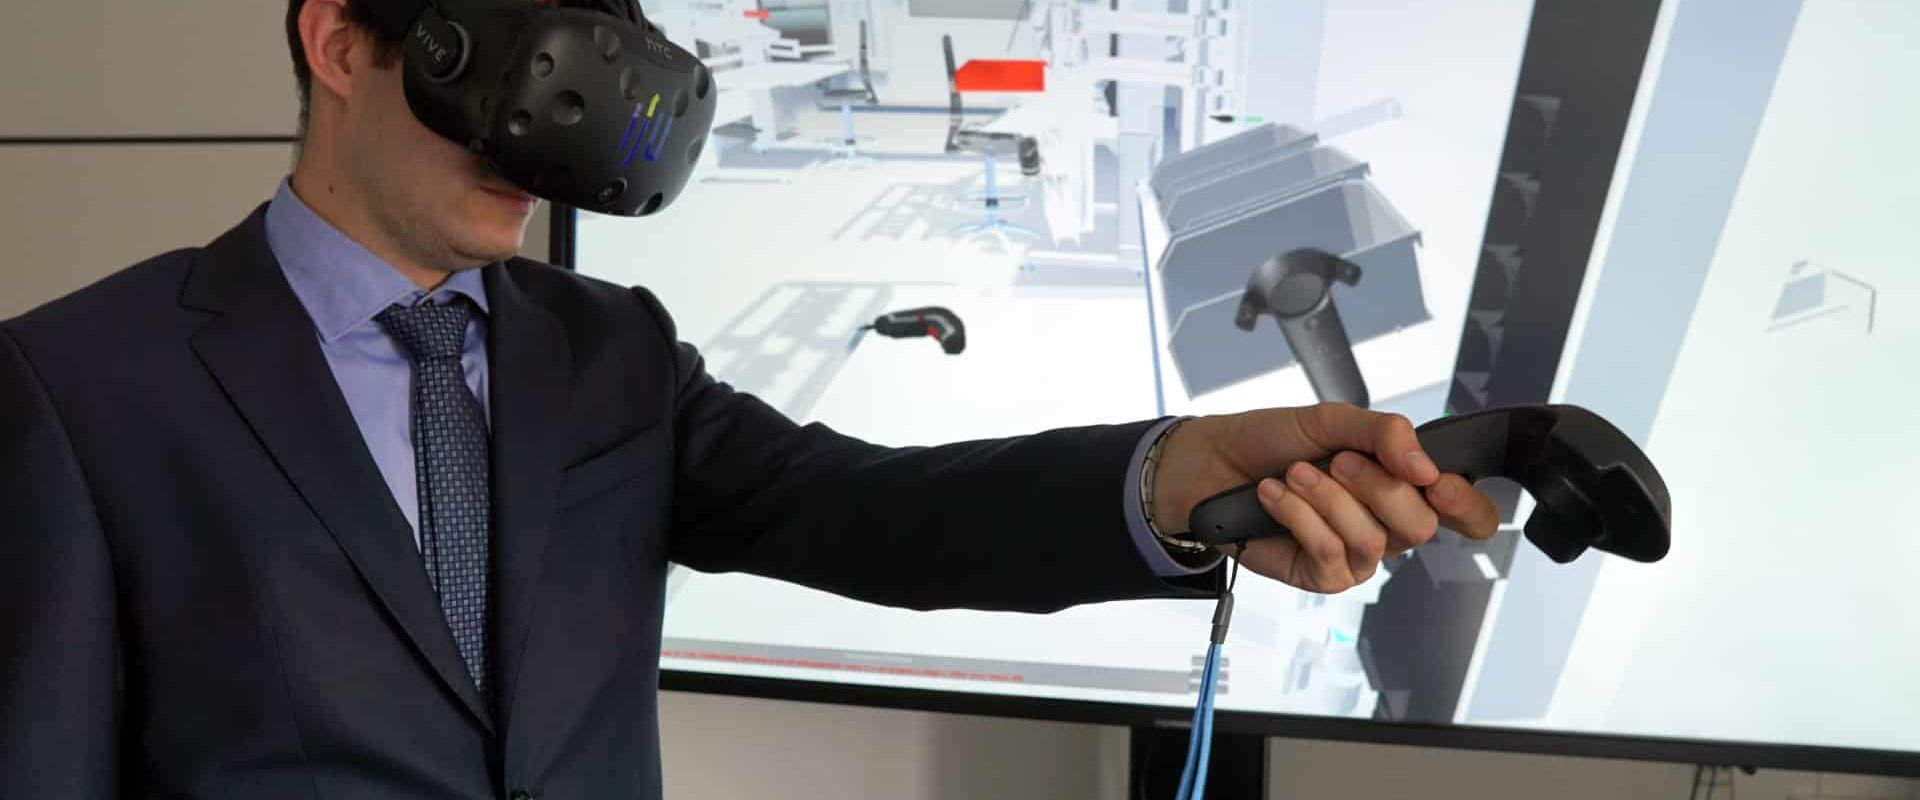 Interactive factory planning with virtual reality